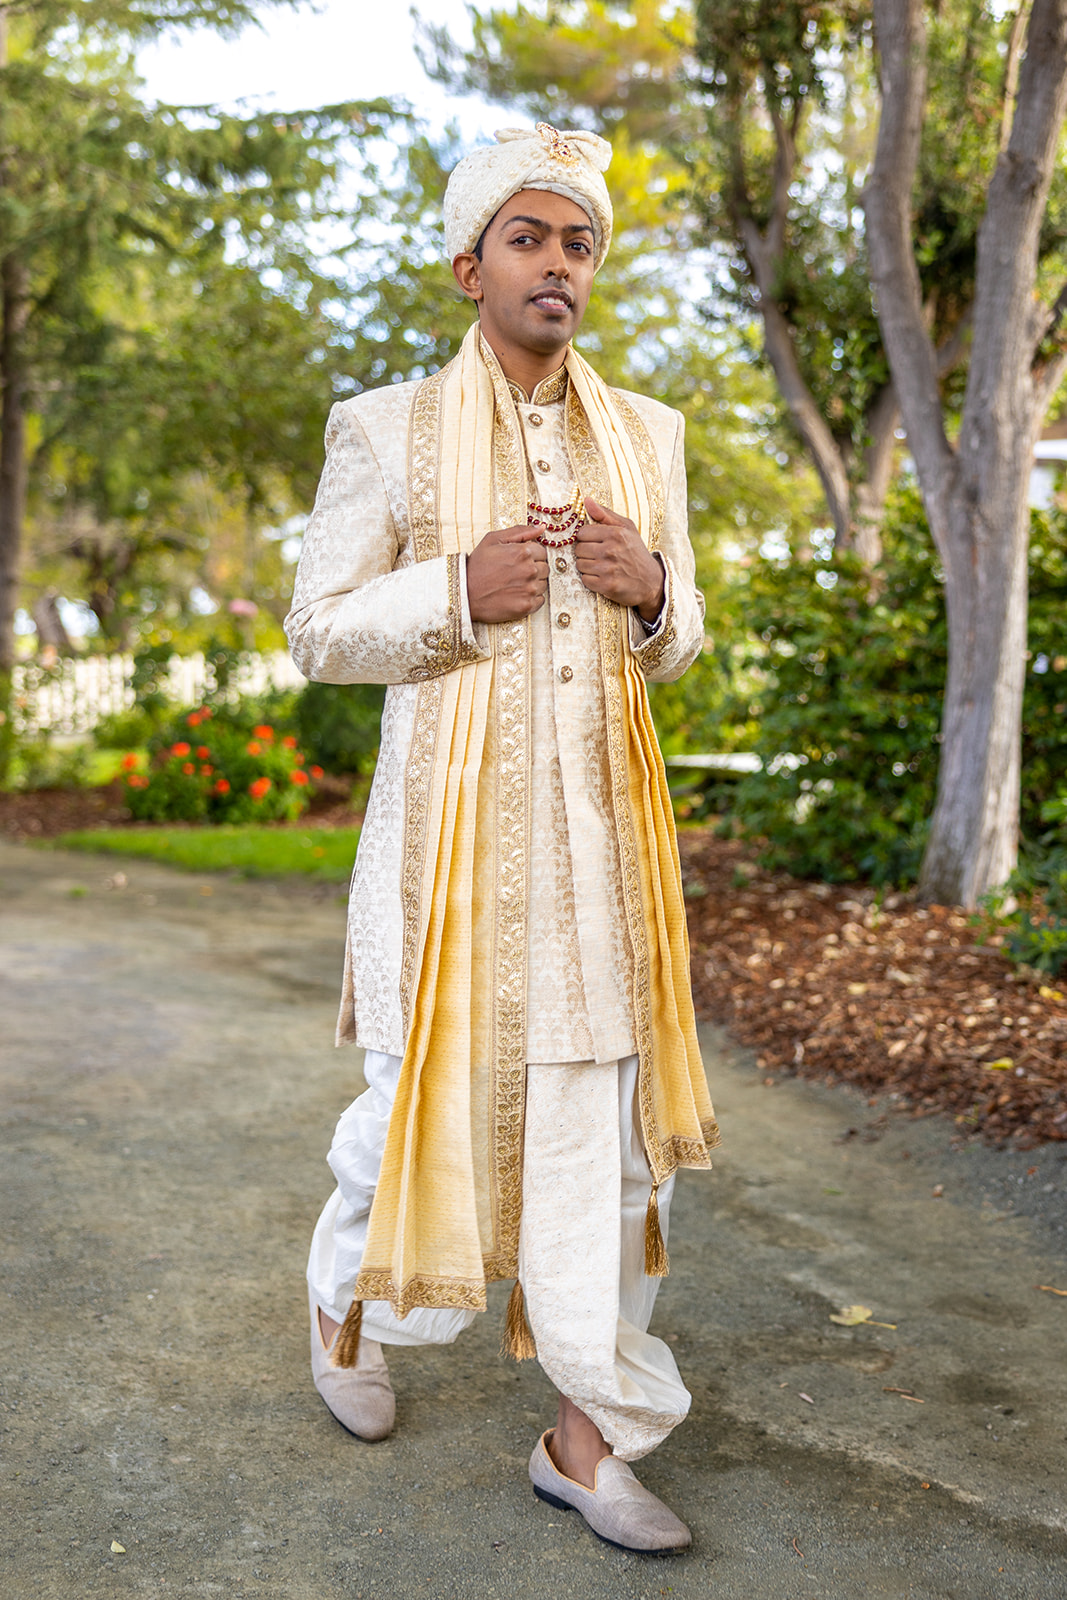 Indian wedding groom walks in his traditional clothing to Indian wedding ceremony at Rengstorff House in the Bay Area.